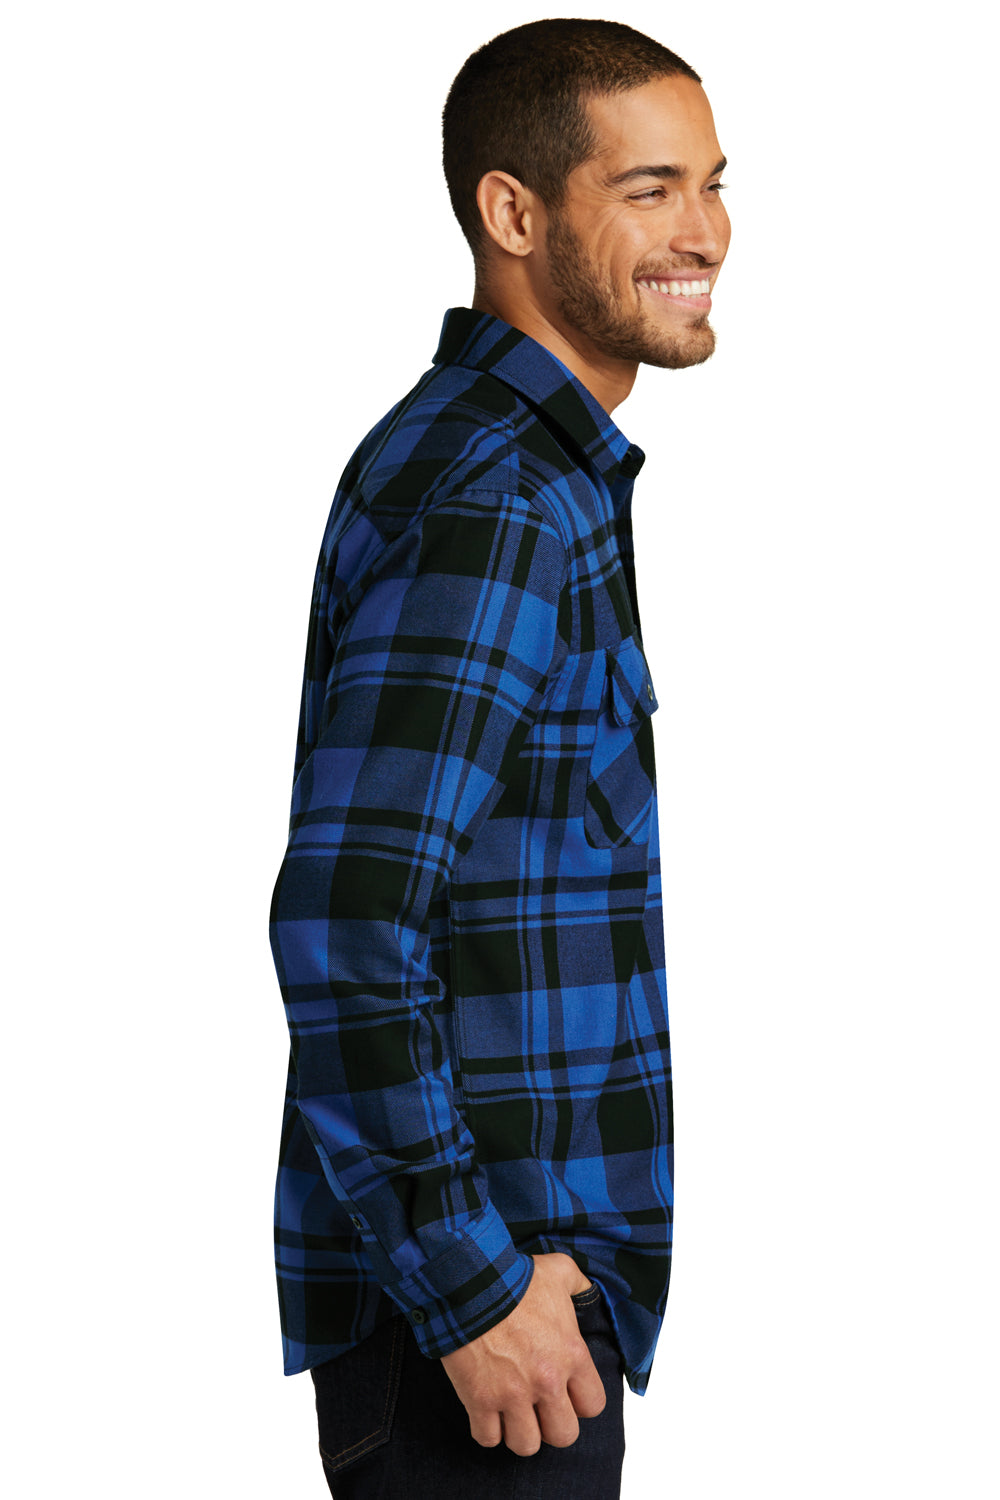 Port Authority W668 Mens Flannel Long Sleeve Button Down Shirt w/ Double Pockets Royal Blue/Black Side